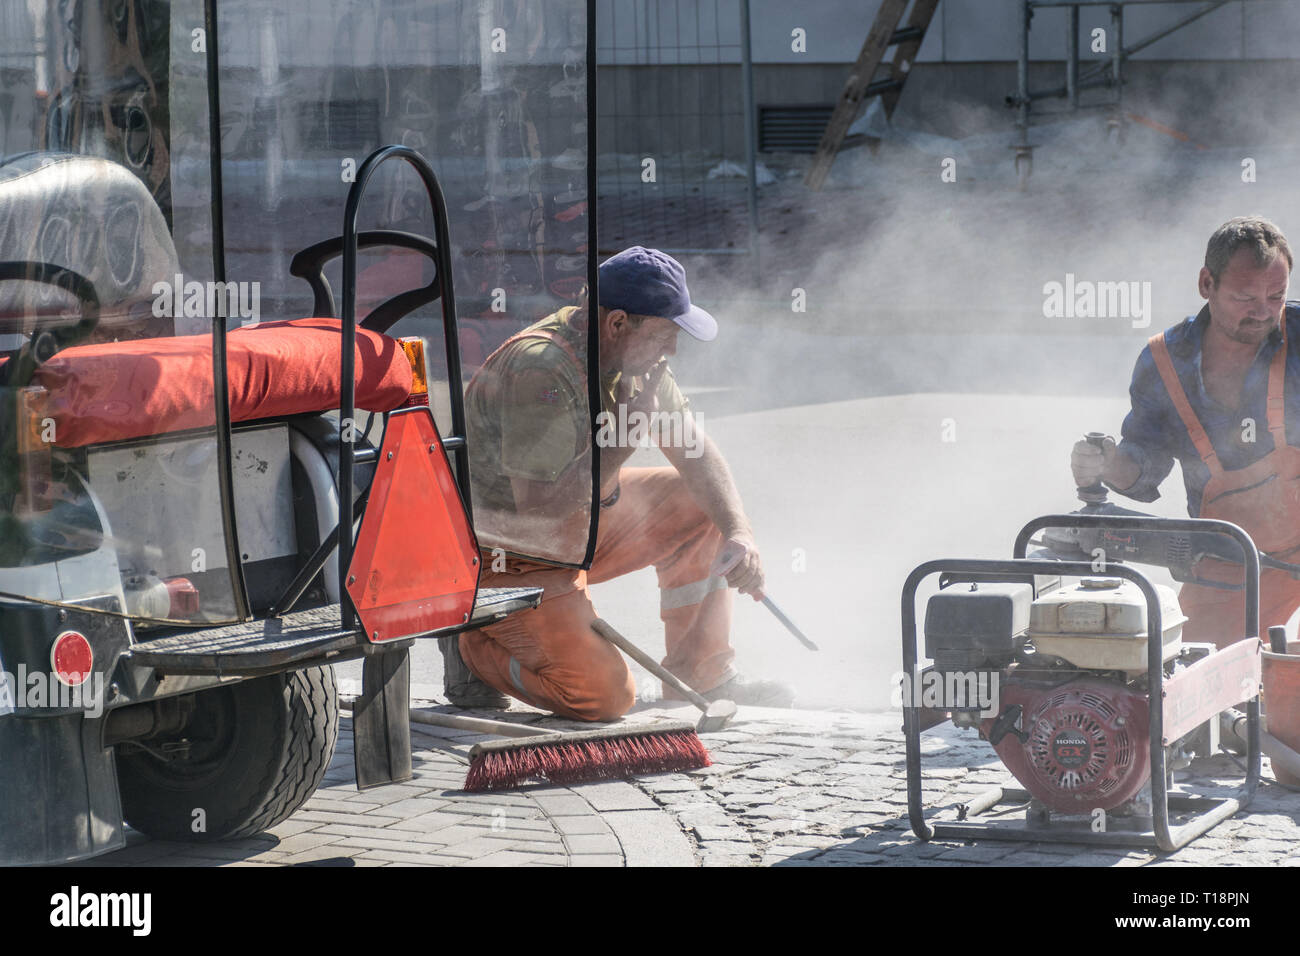 Krakow, Poland - September 21, 2019: Road workers at asphalt roadway street patching reaparing work while smokes a cigar Stock Photo